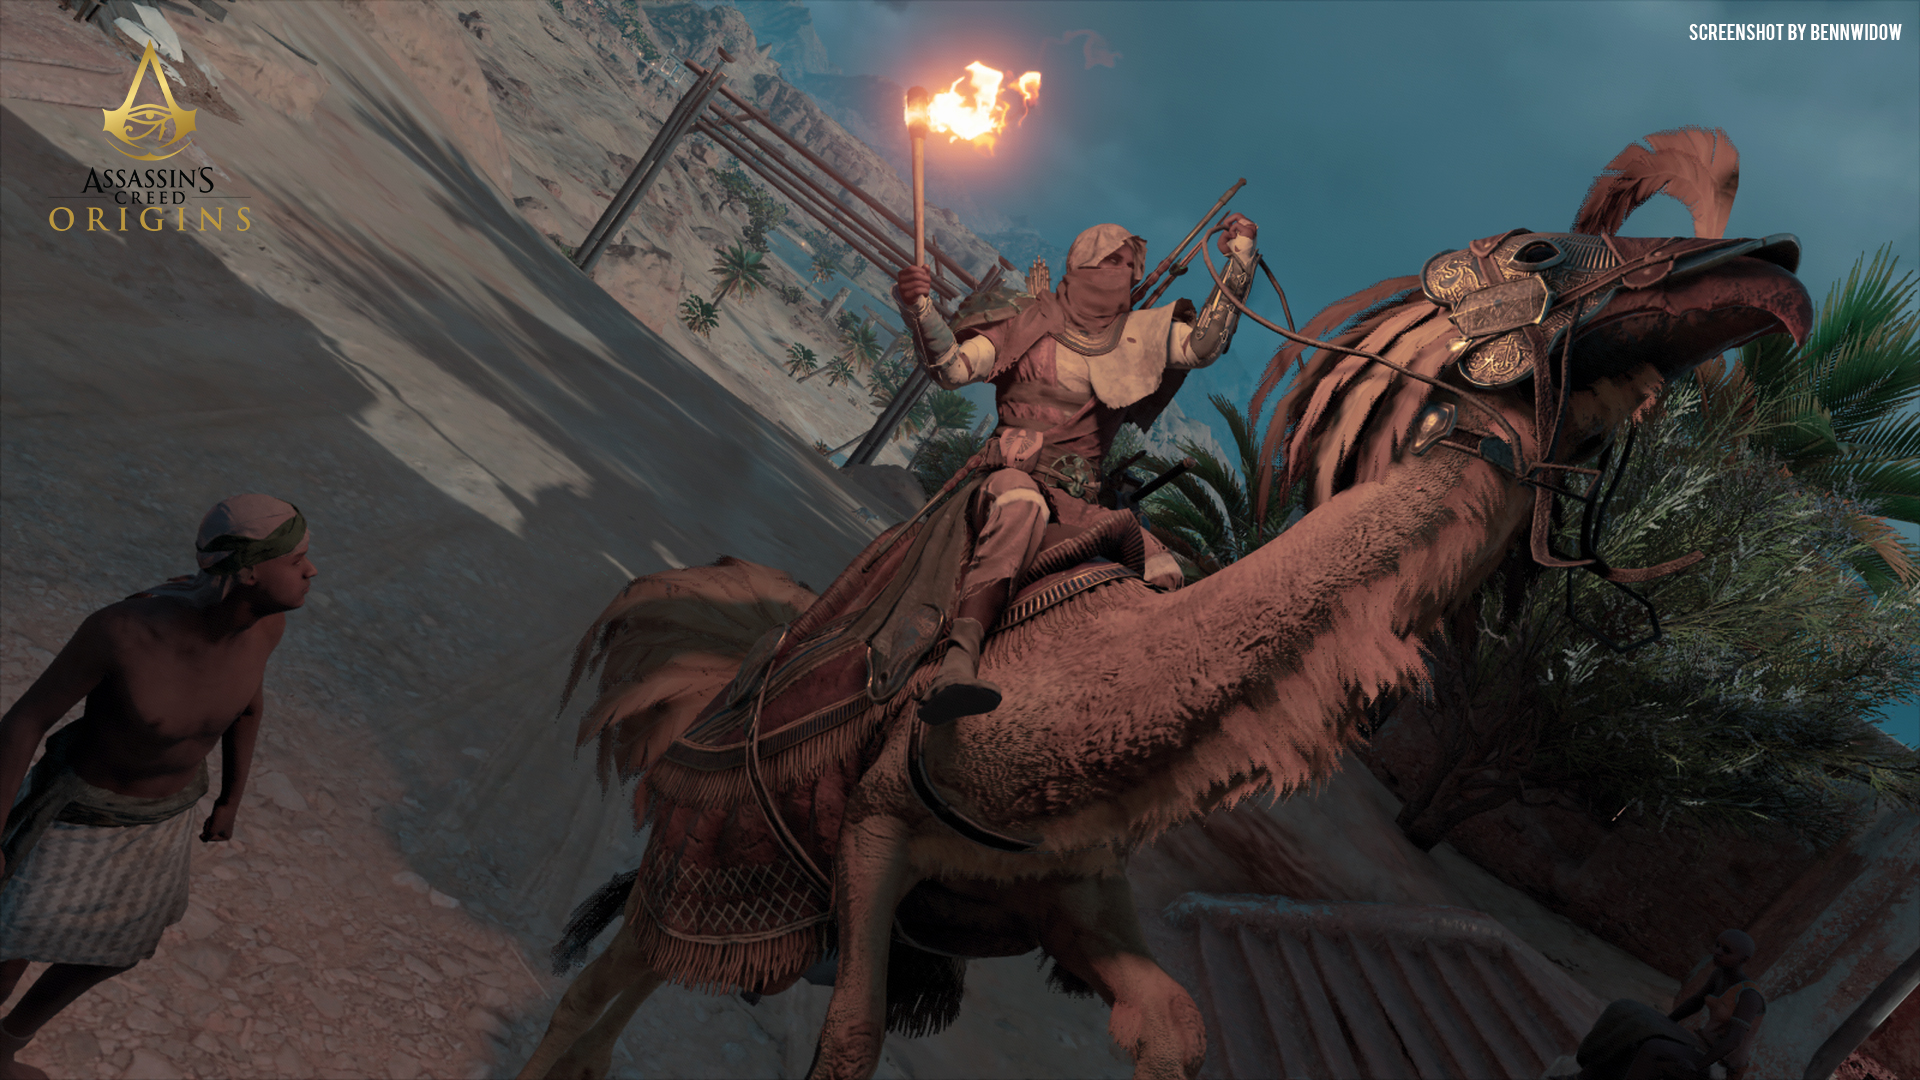 General 1920x1080 Assassin's Creed Assassin's Creed: Origins Xbox Xbox One Chocobo video games Ubisoft video game characters video game crossover Bayek